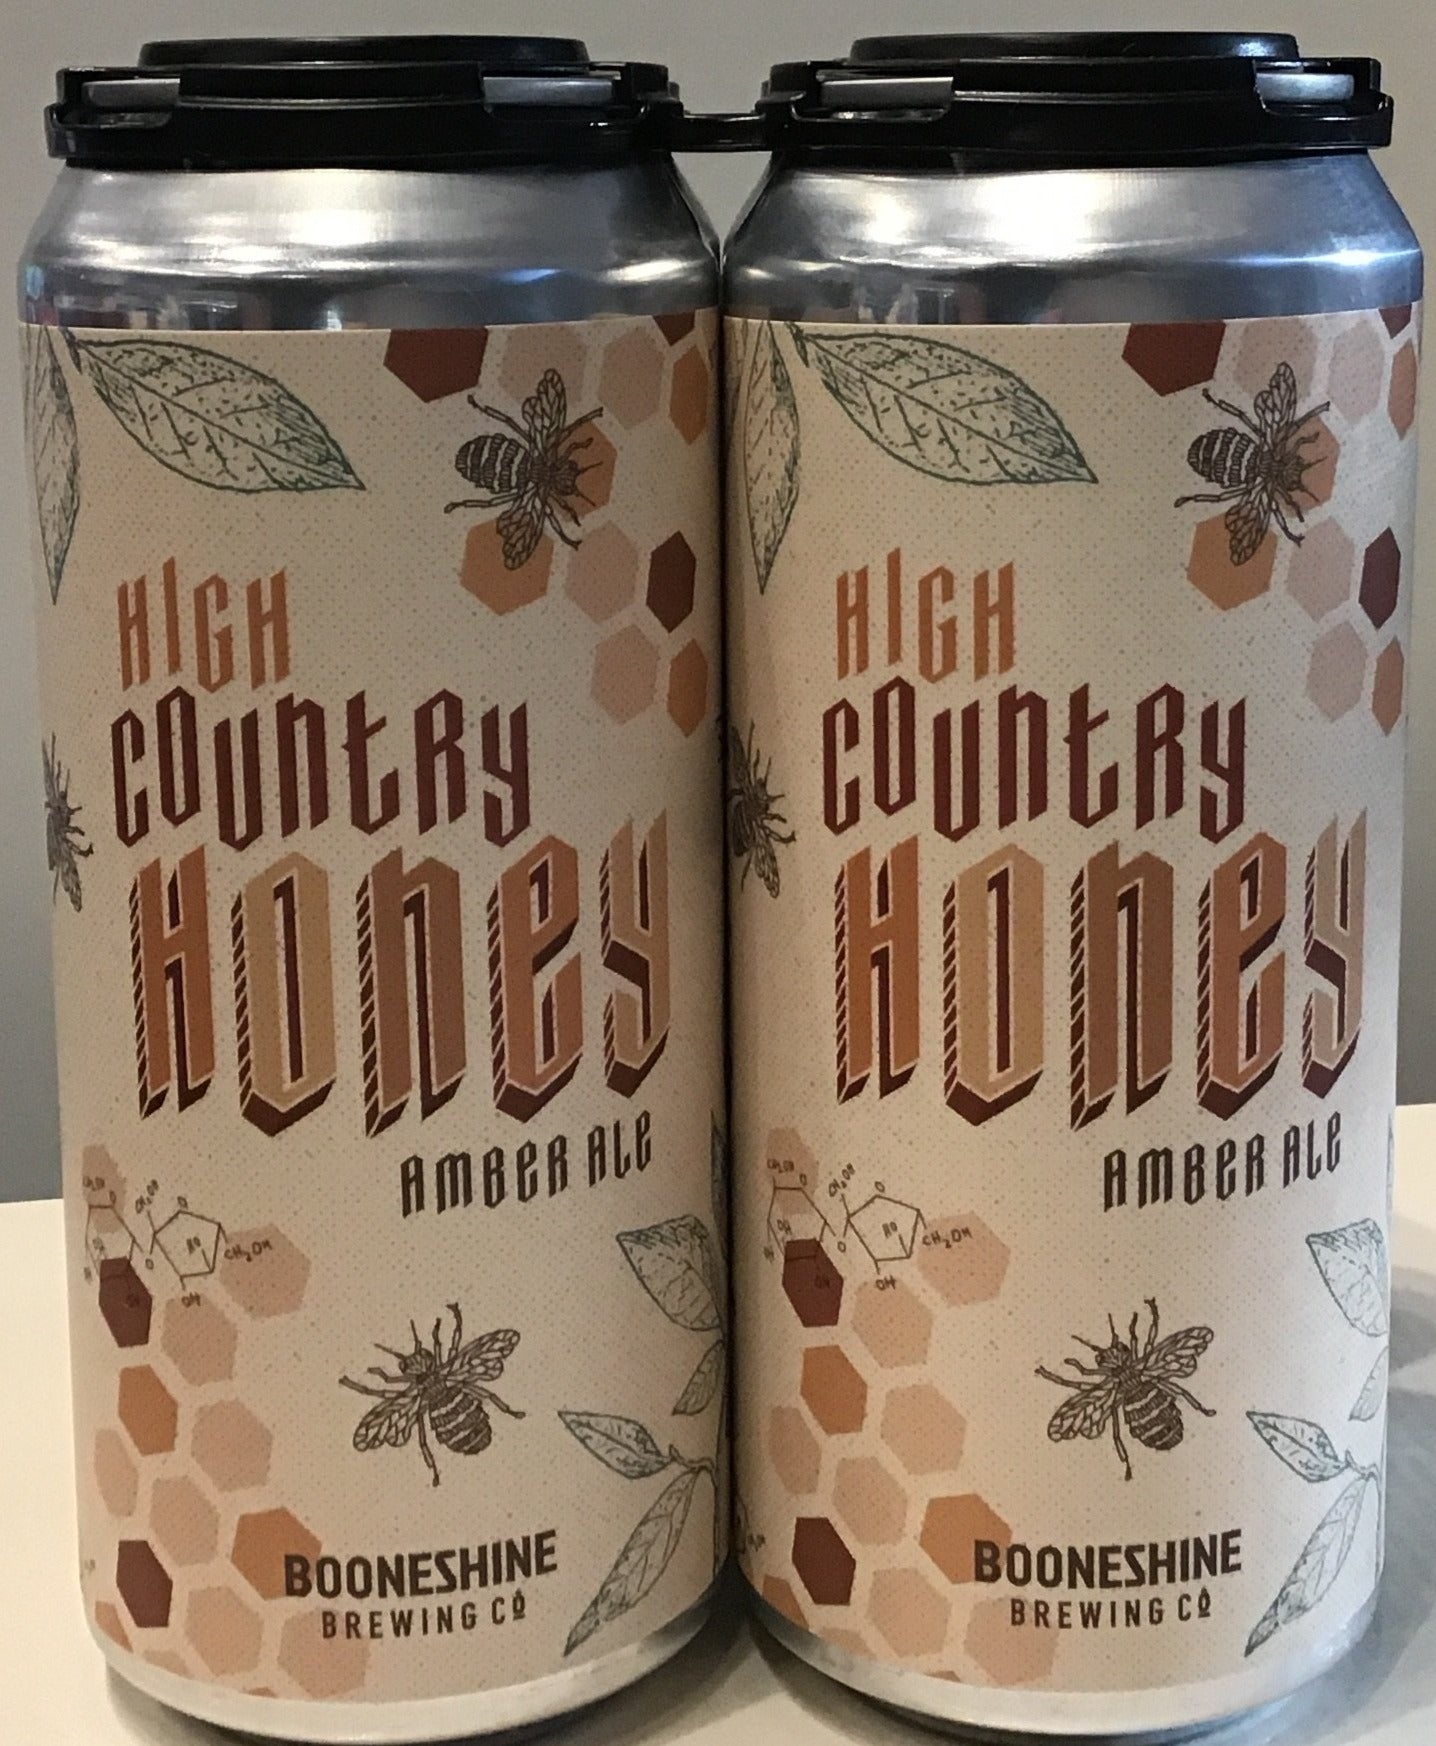 Booneshine Brewing 'High Country Honey' - Amber Ale - 4 pack